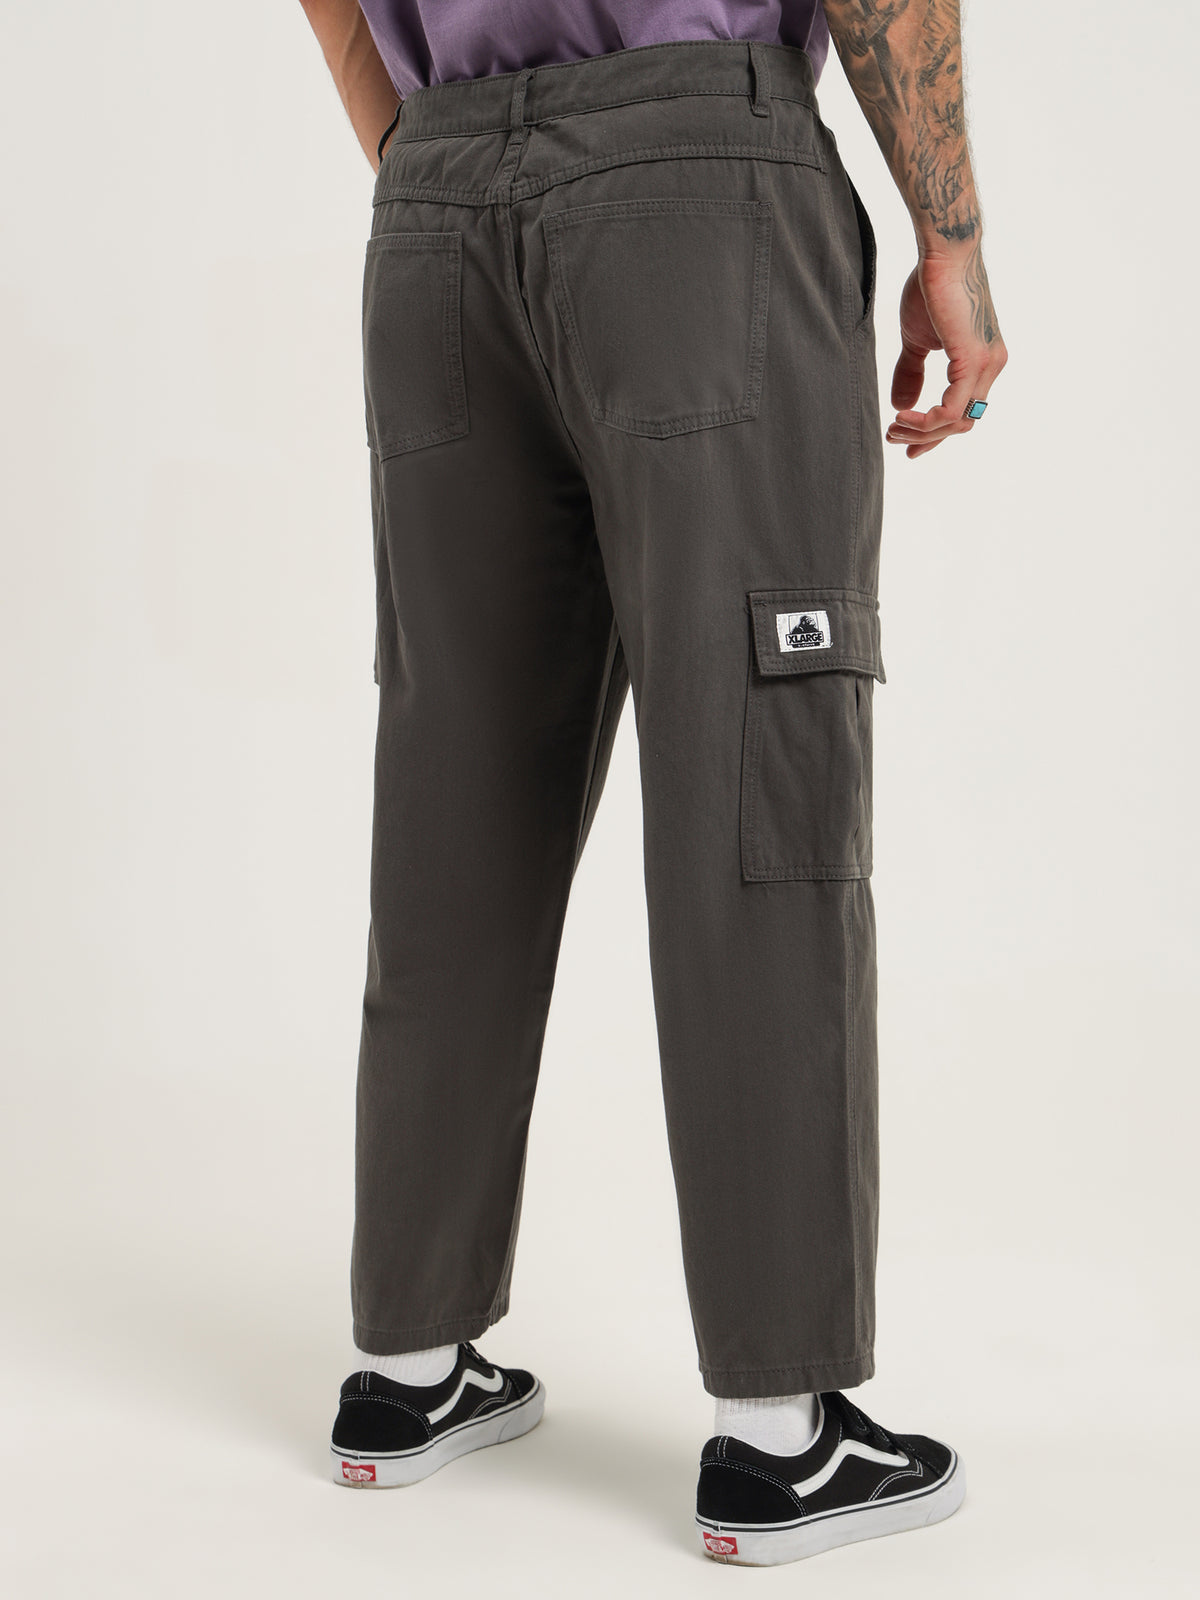 91 Cargo Pant in Charcoal